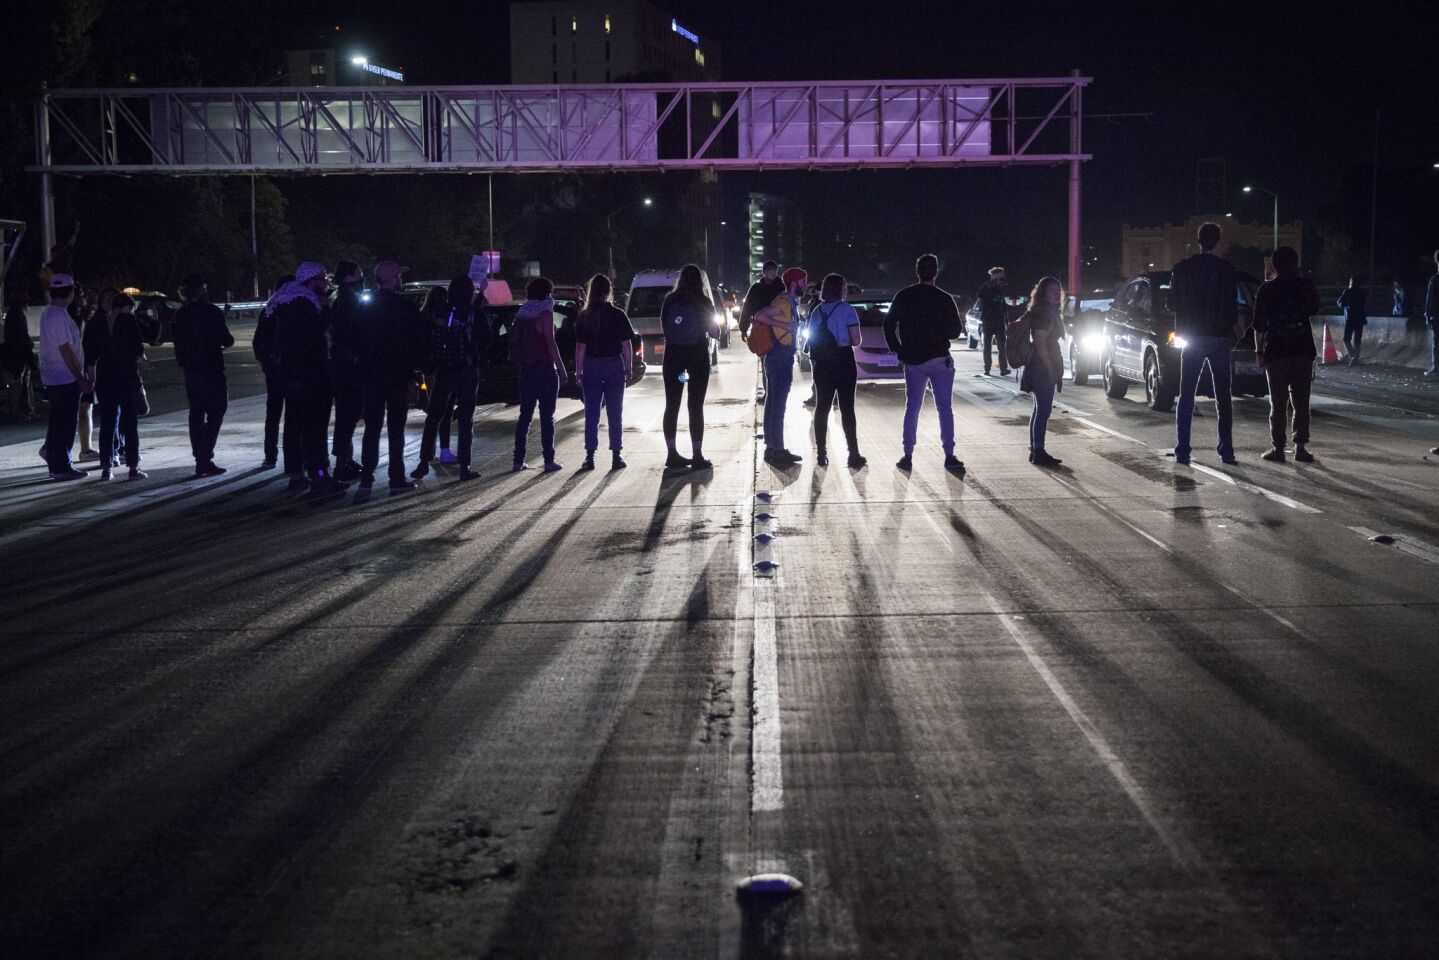 Demonstrators block traffic on the 580 Freeway during a march through the streets in protest against President-elect Donald Trump in Oakland, California.